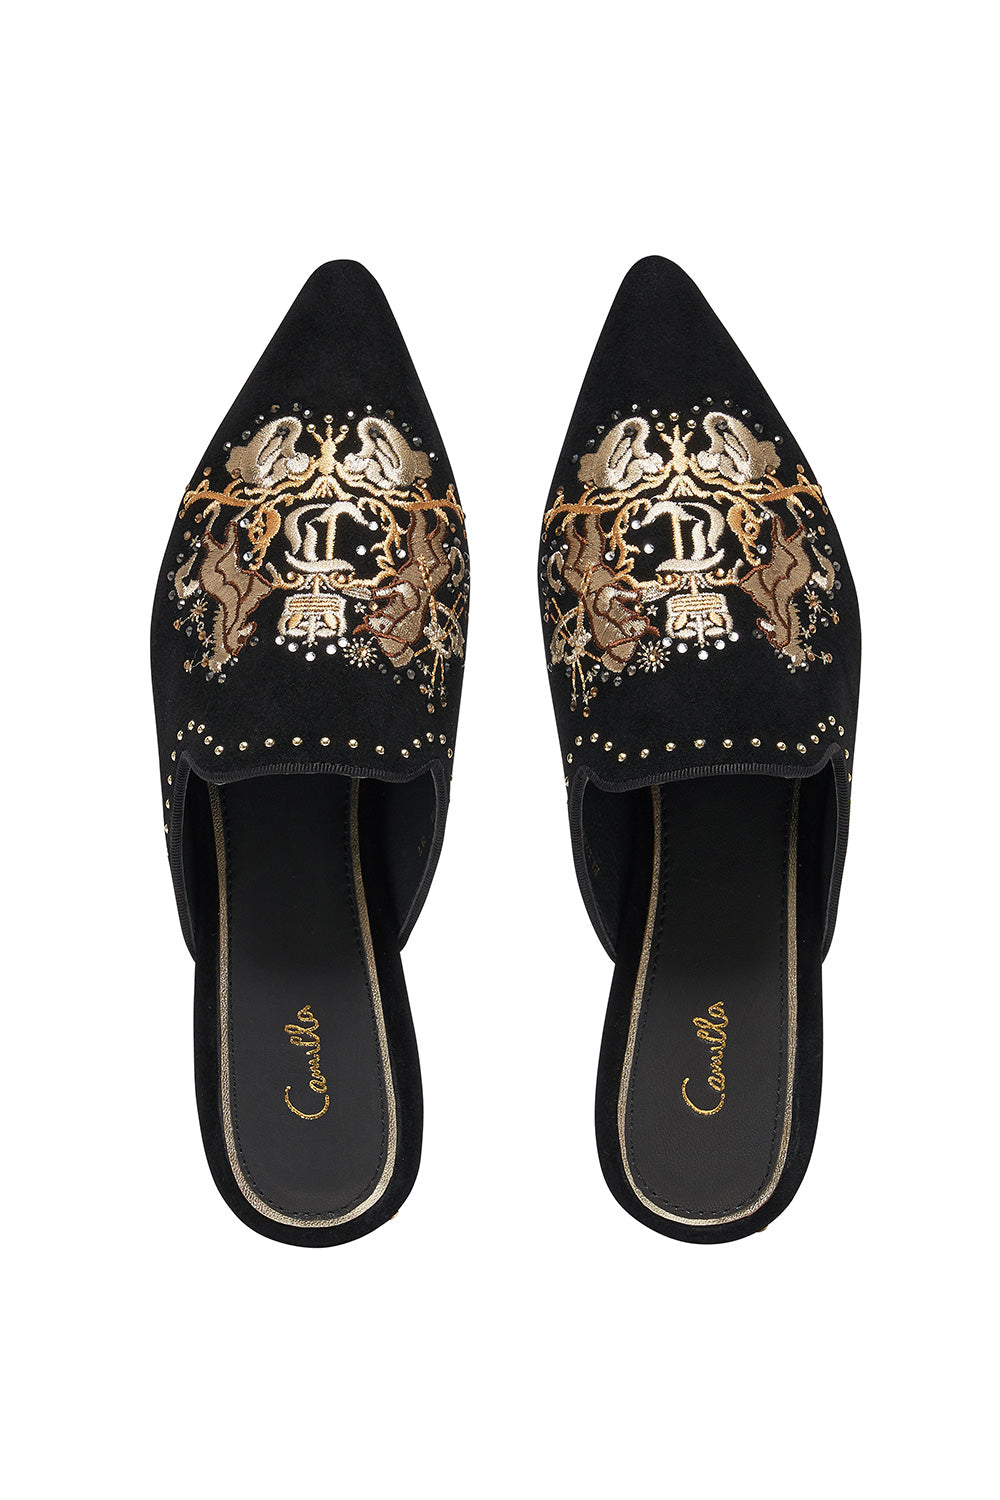 EMBROIDERED SLIPPER DINING HALL DARLING